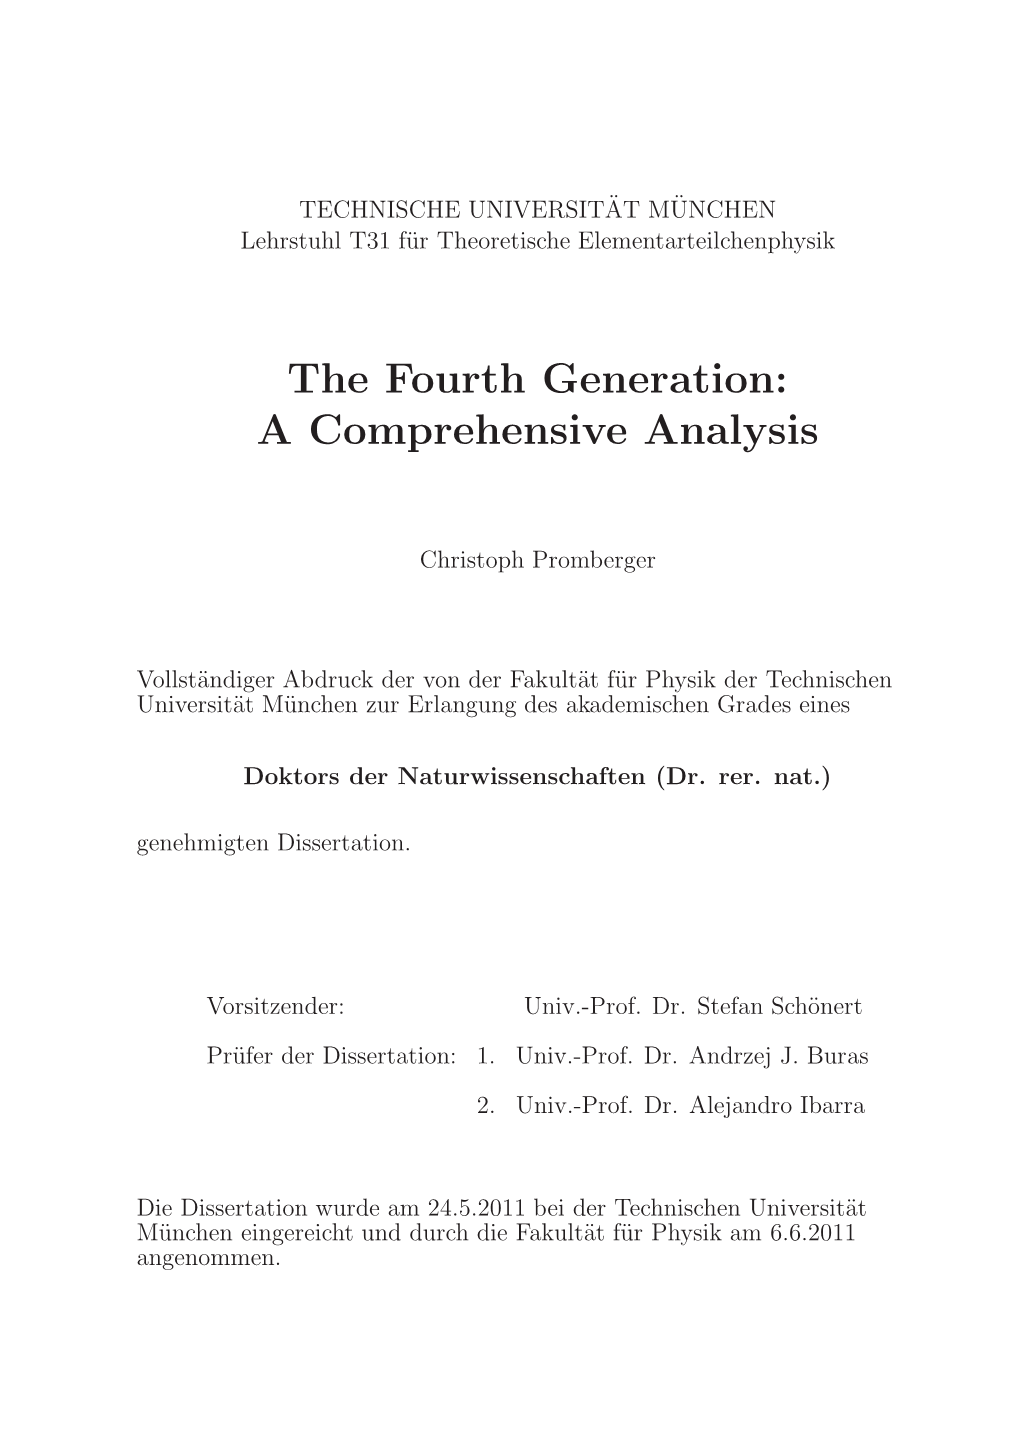 The Fourth Generation: a Comprehensive Analysis